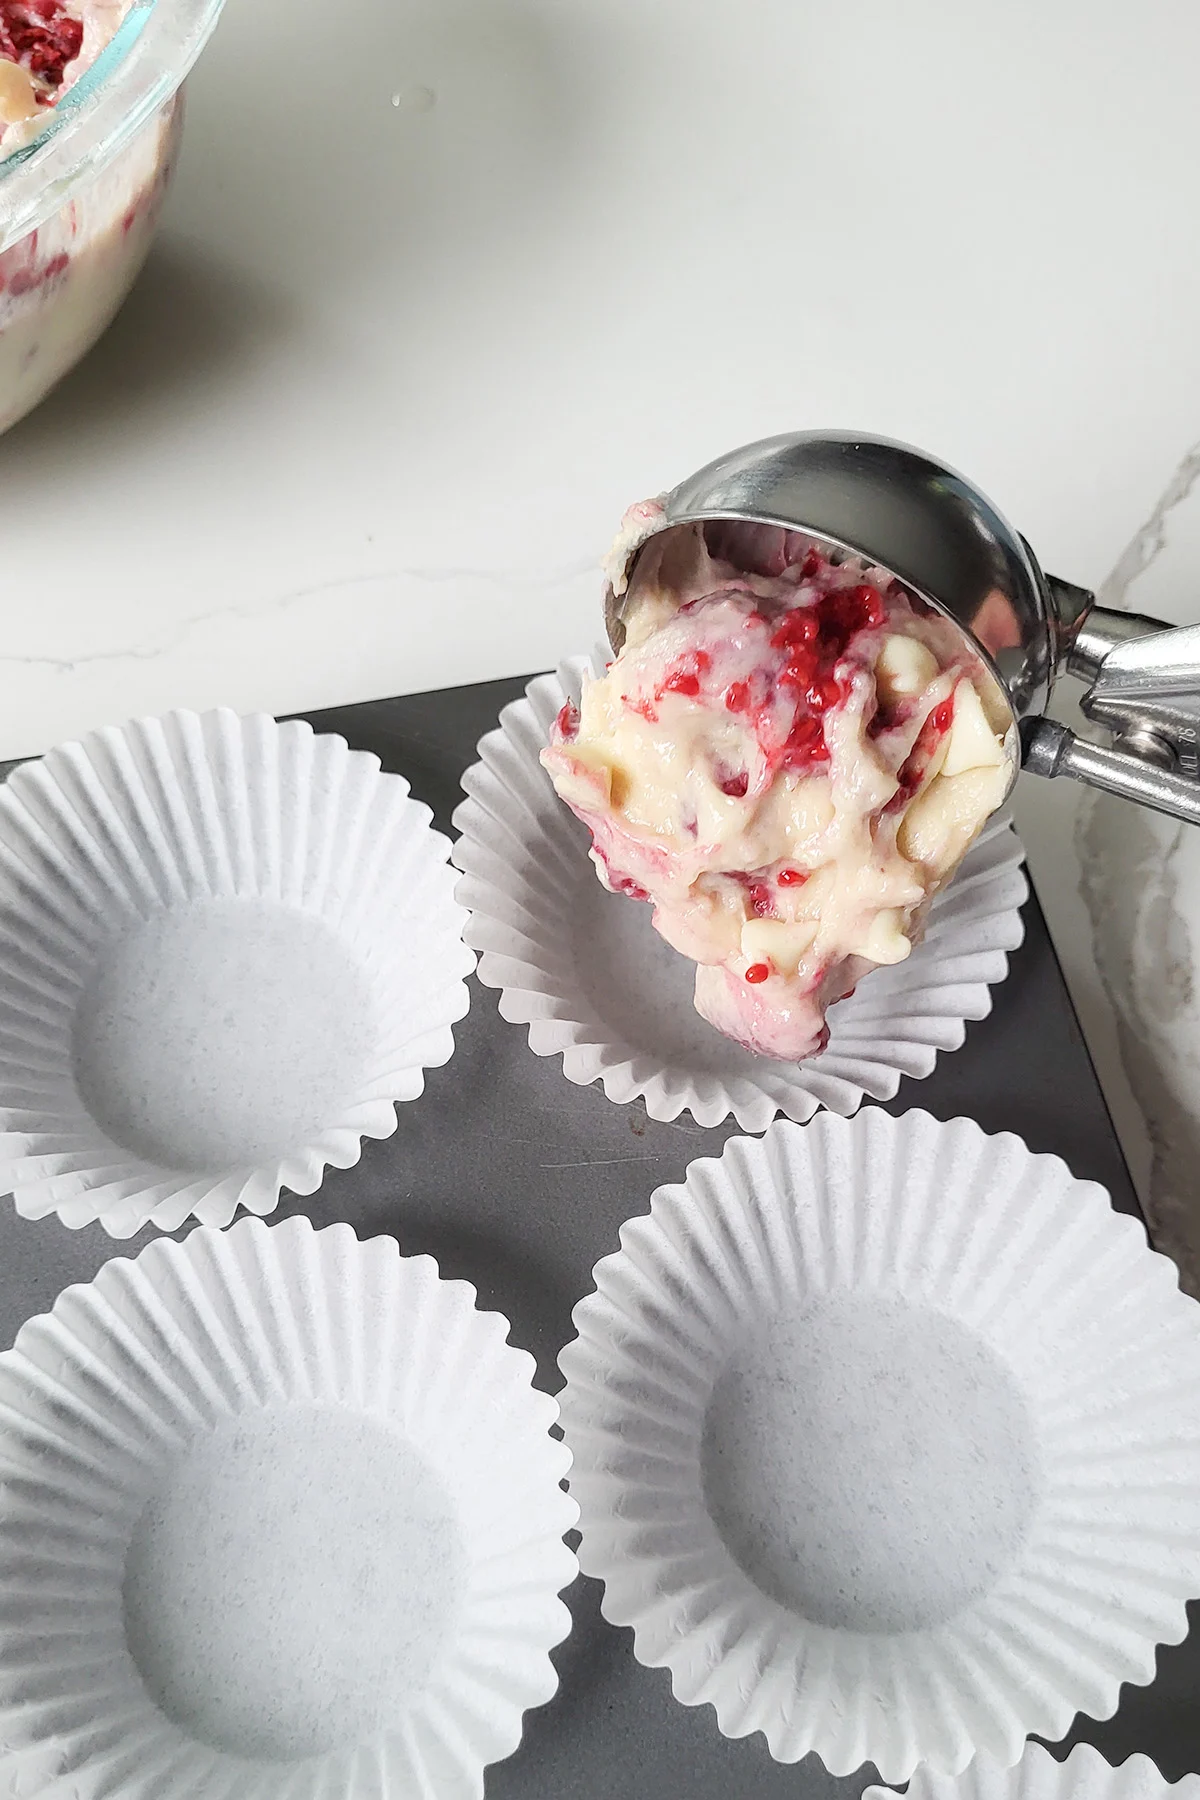 a scooper putting raspberry muffin batter into a paper lined muffin tin.